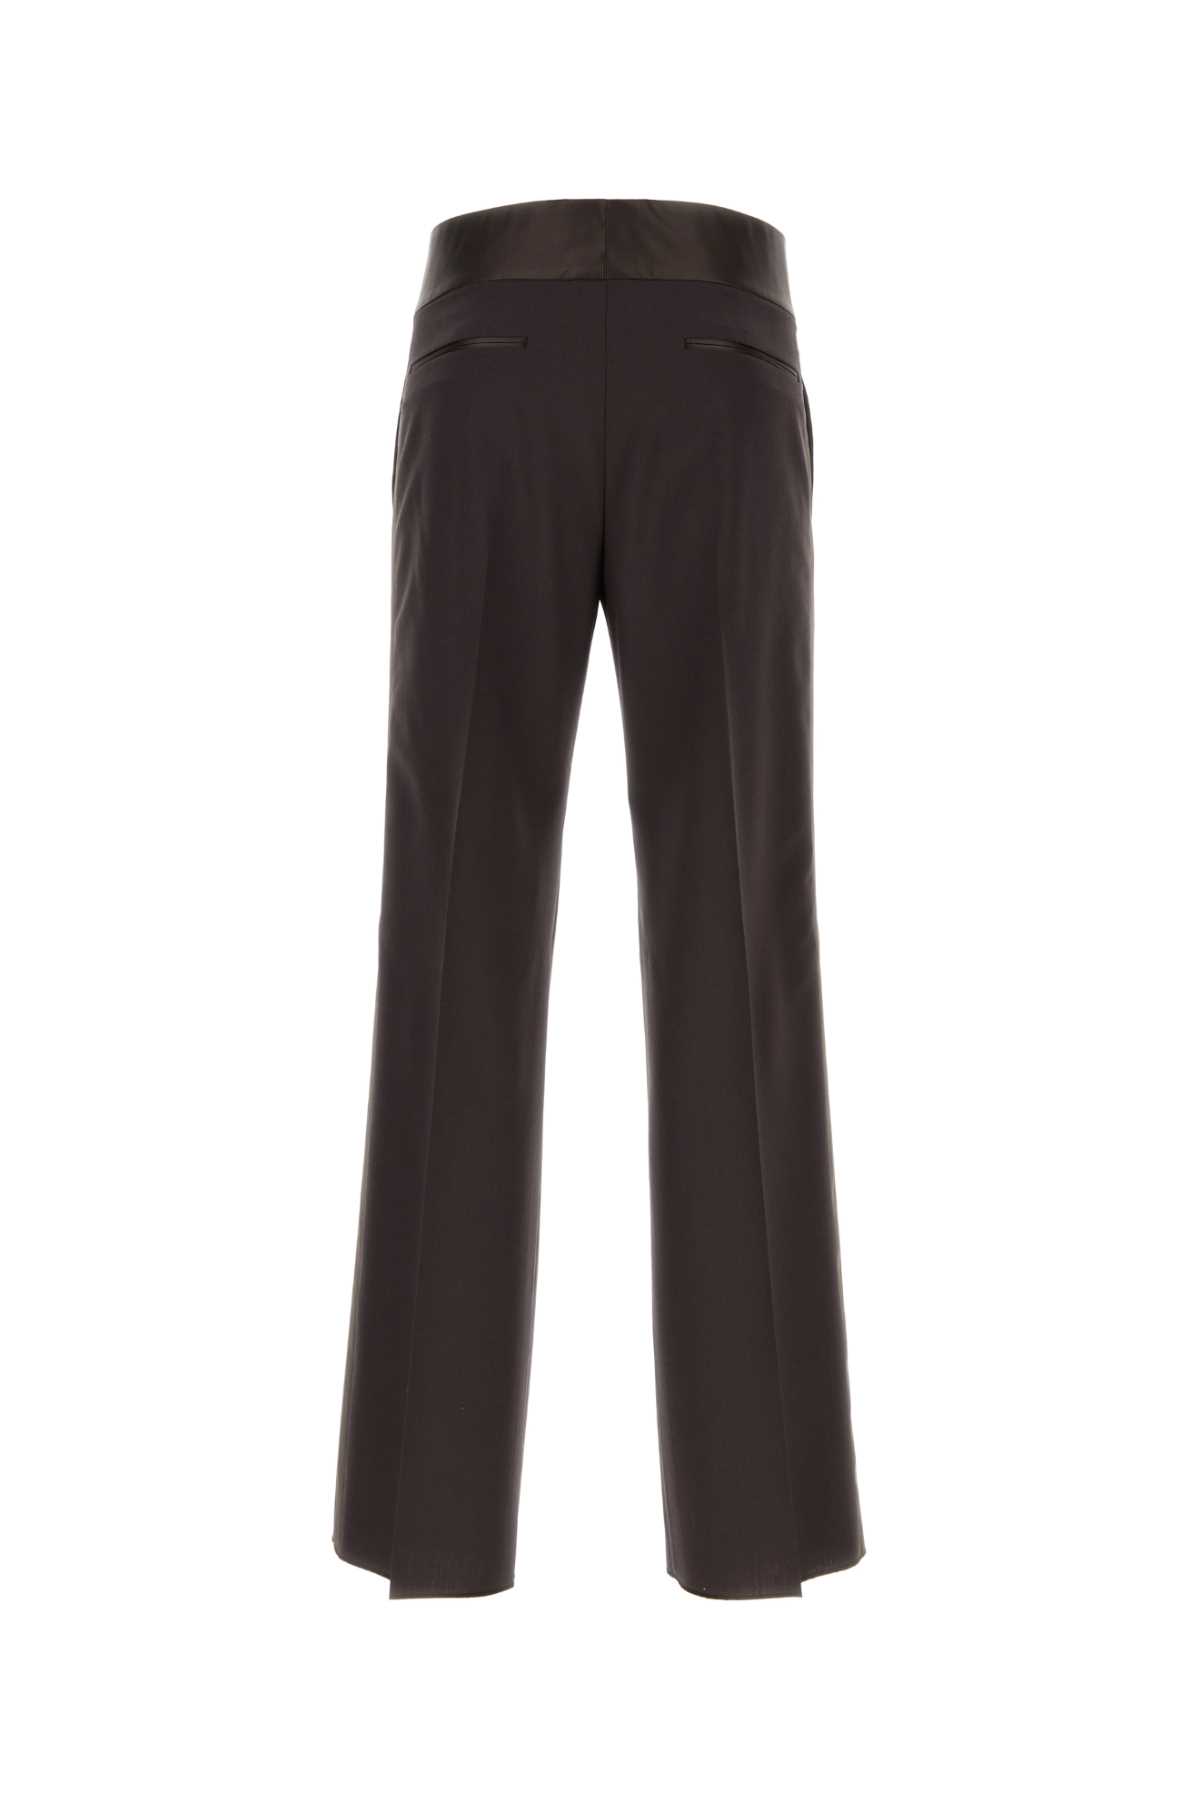 Valentino Chocolate Wool Pant In Brown